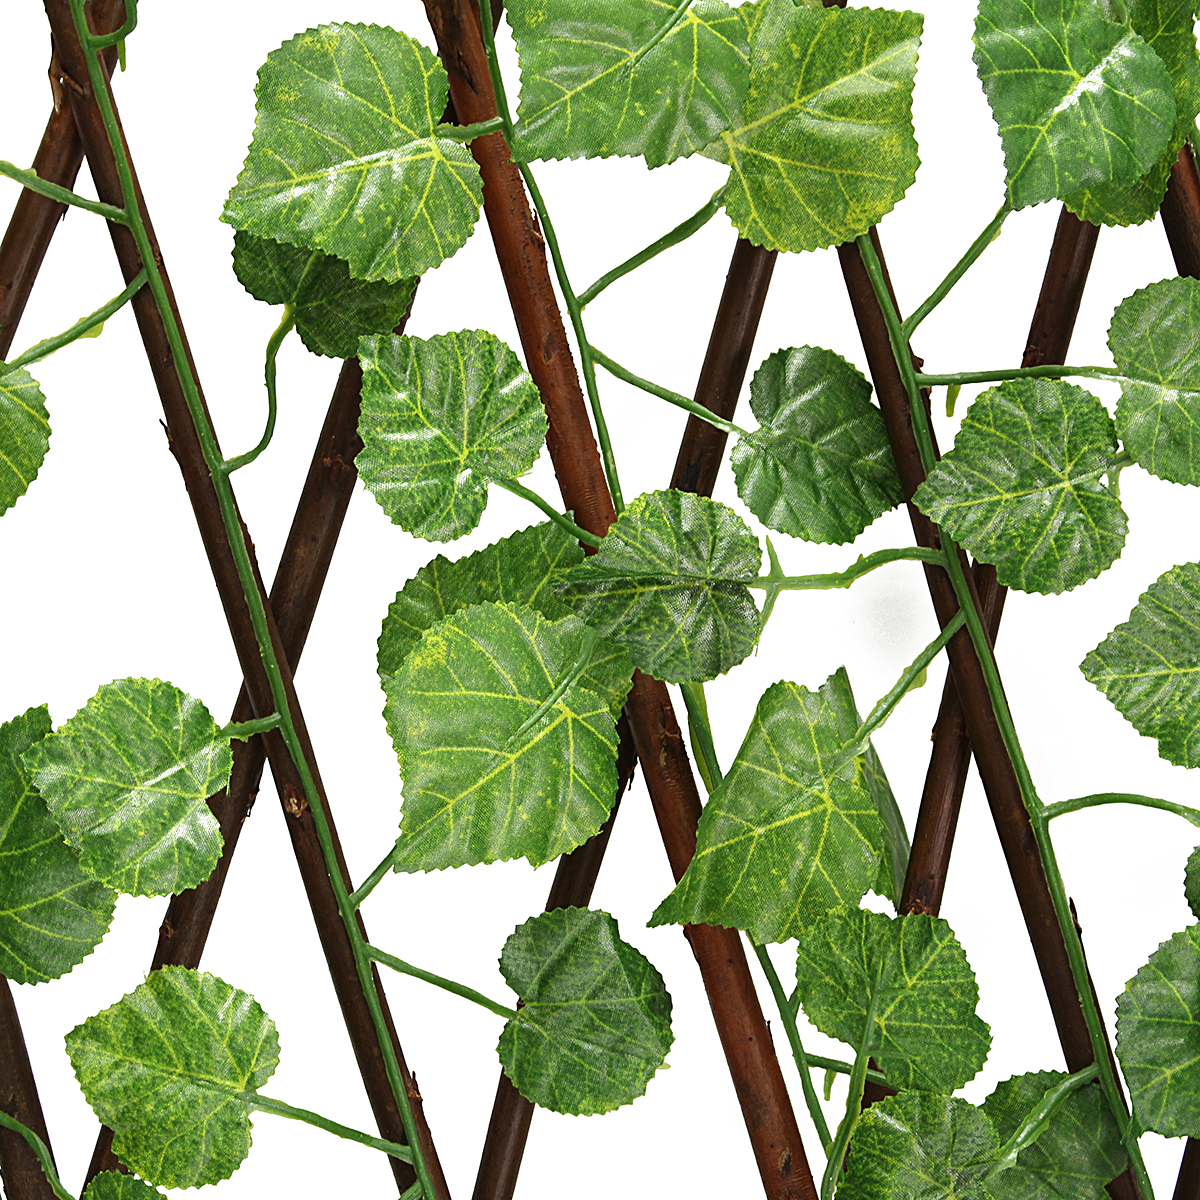 Artificial-Ivy-Expandable-Stretchable-Privacy-Fence-Faux-Single-Side-Leafs-Vine-Screen-for-Outdoor-G-1862476-25